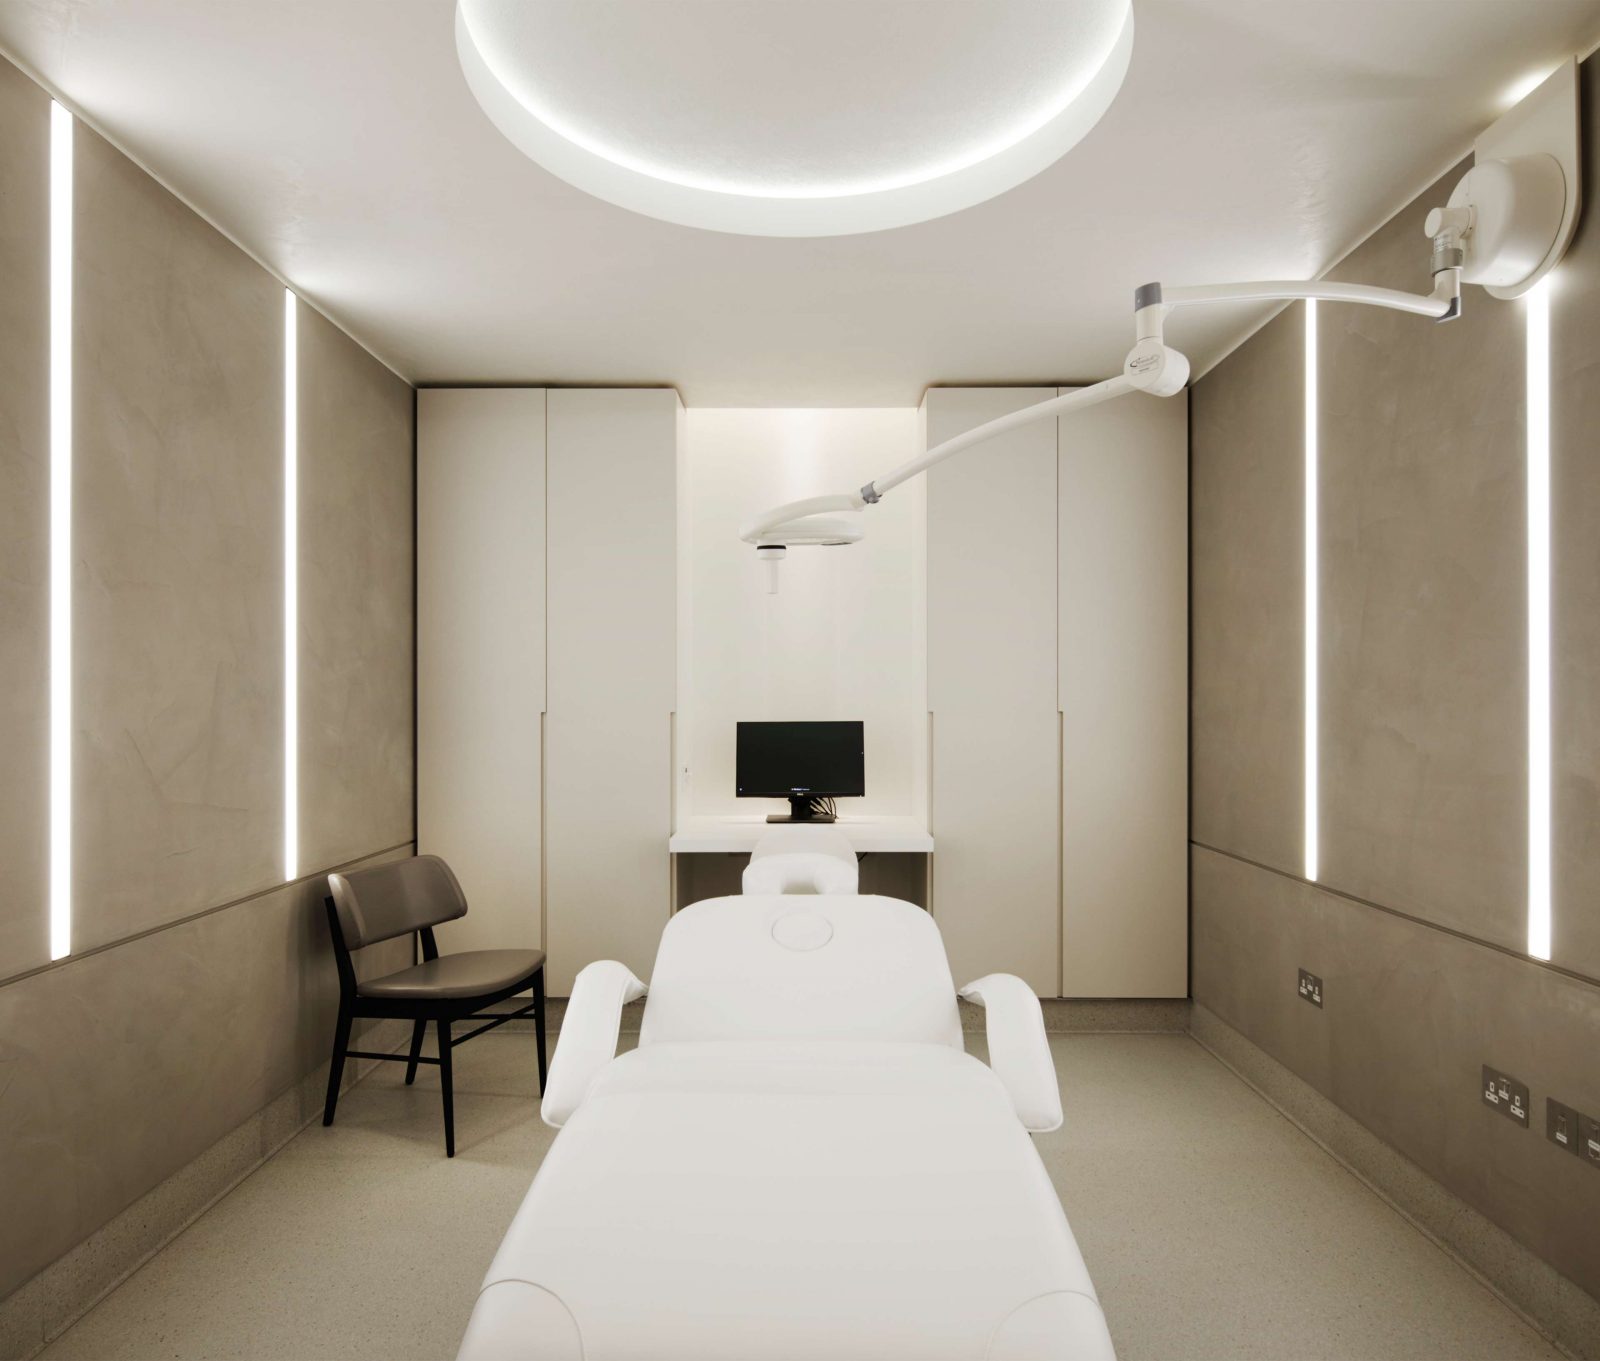 Architectural Lighting Scheme Integrated Ceiling Walls Spa Treatment Room Studio N